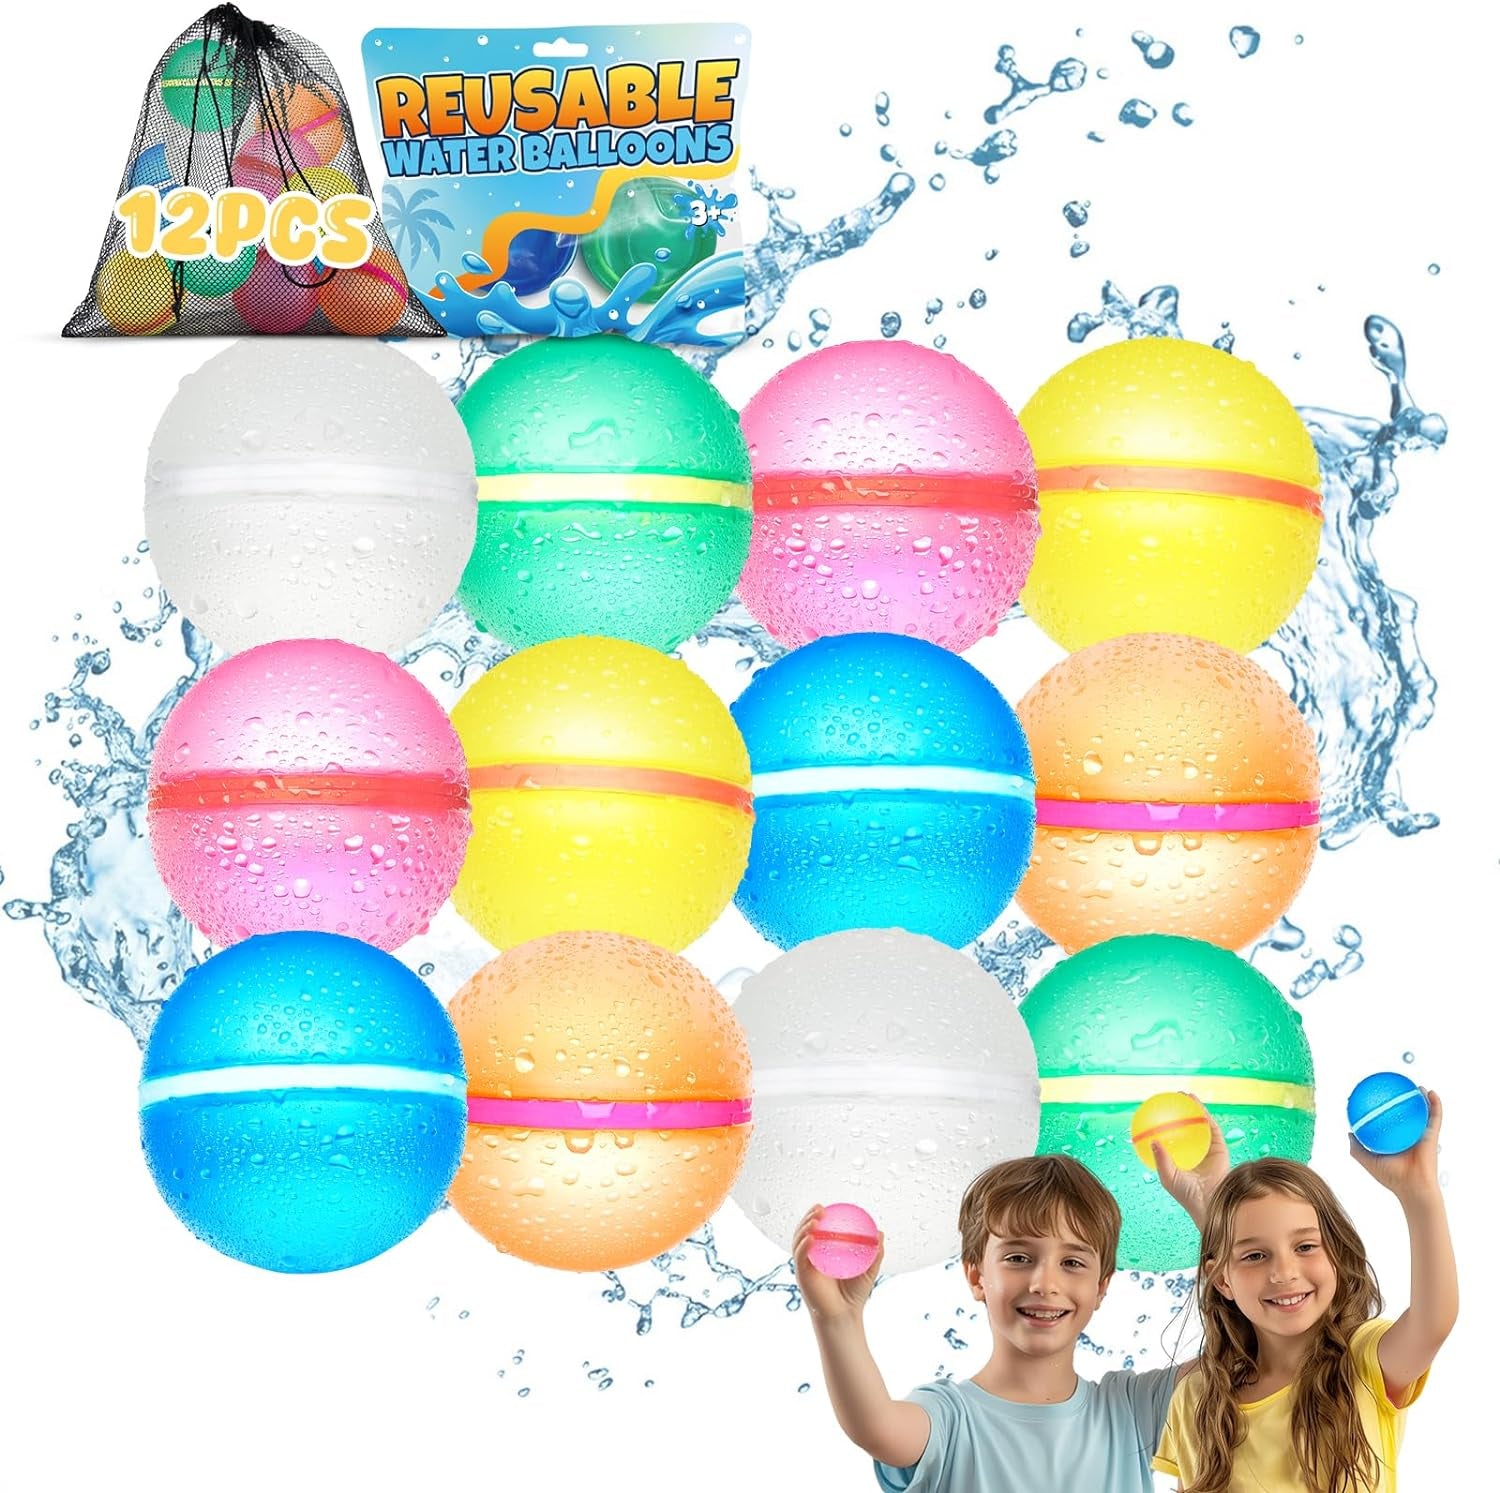 Reusable Water Balloons for Kids - Summer Toys, Pool Beach Water Toys for Boys and Girls, Silicone Water Balloons Quick Fill Splash Balls Bomb Party Supplies Outdoor Idea with Mesh Bag (12 Pcs)